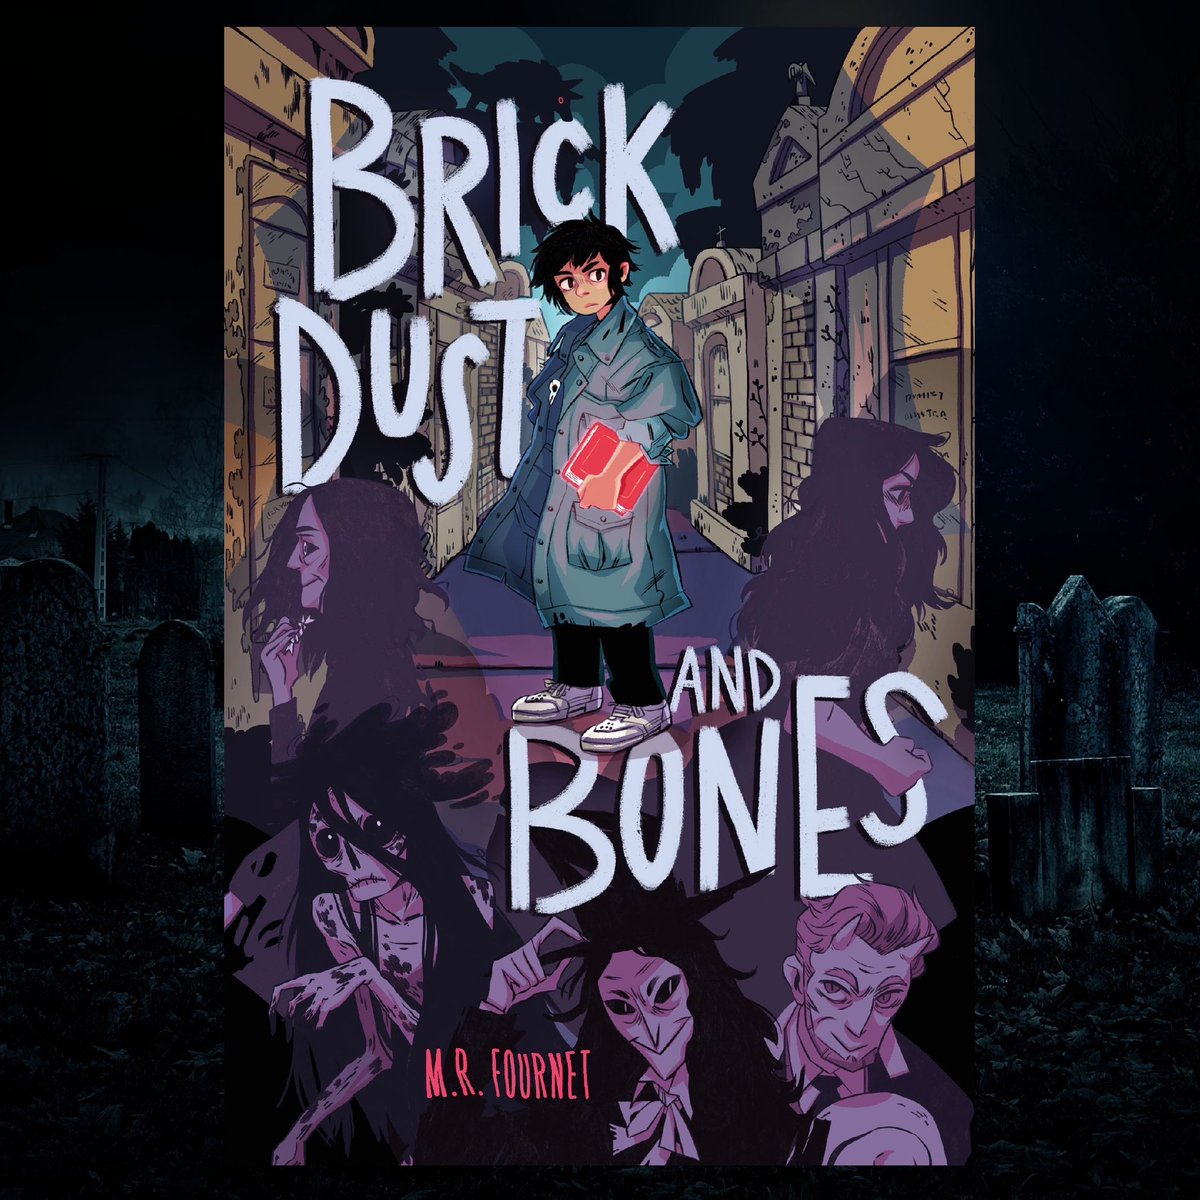 Today is my book’s birthday! The project I’ve been working on for three years is out in the world. I’m so proud! You can find it at most book stores and libraries. @HandspunLit @MacKidsSL @Holliambria @MacKidsBooks @AgentBenMC #brickdustandbones 

tinyurl.com/Brick-Dust-and…